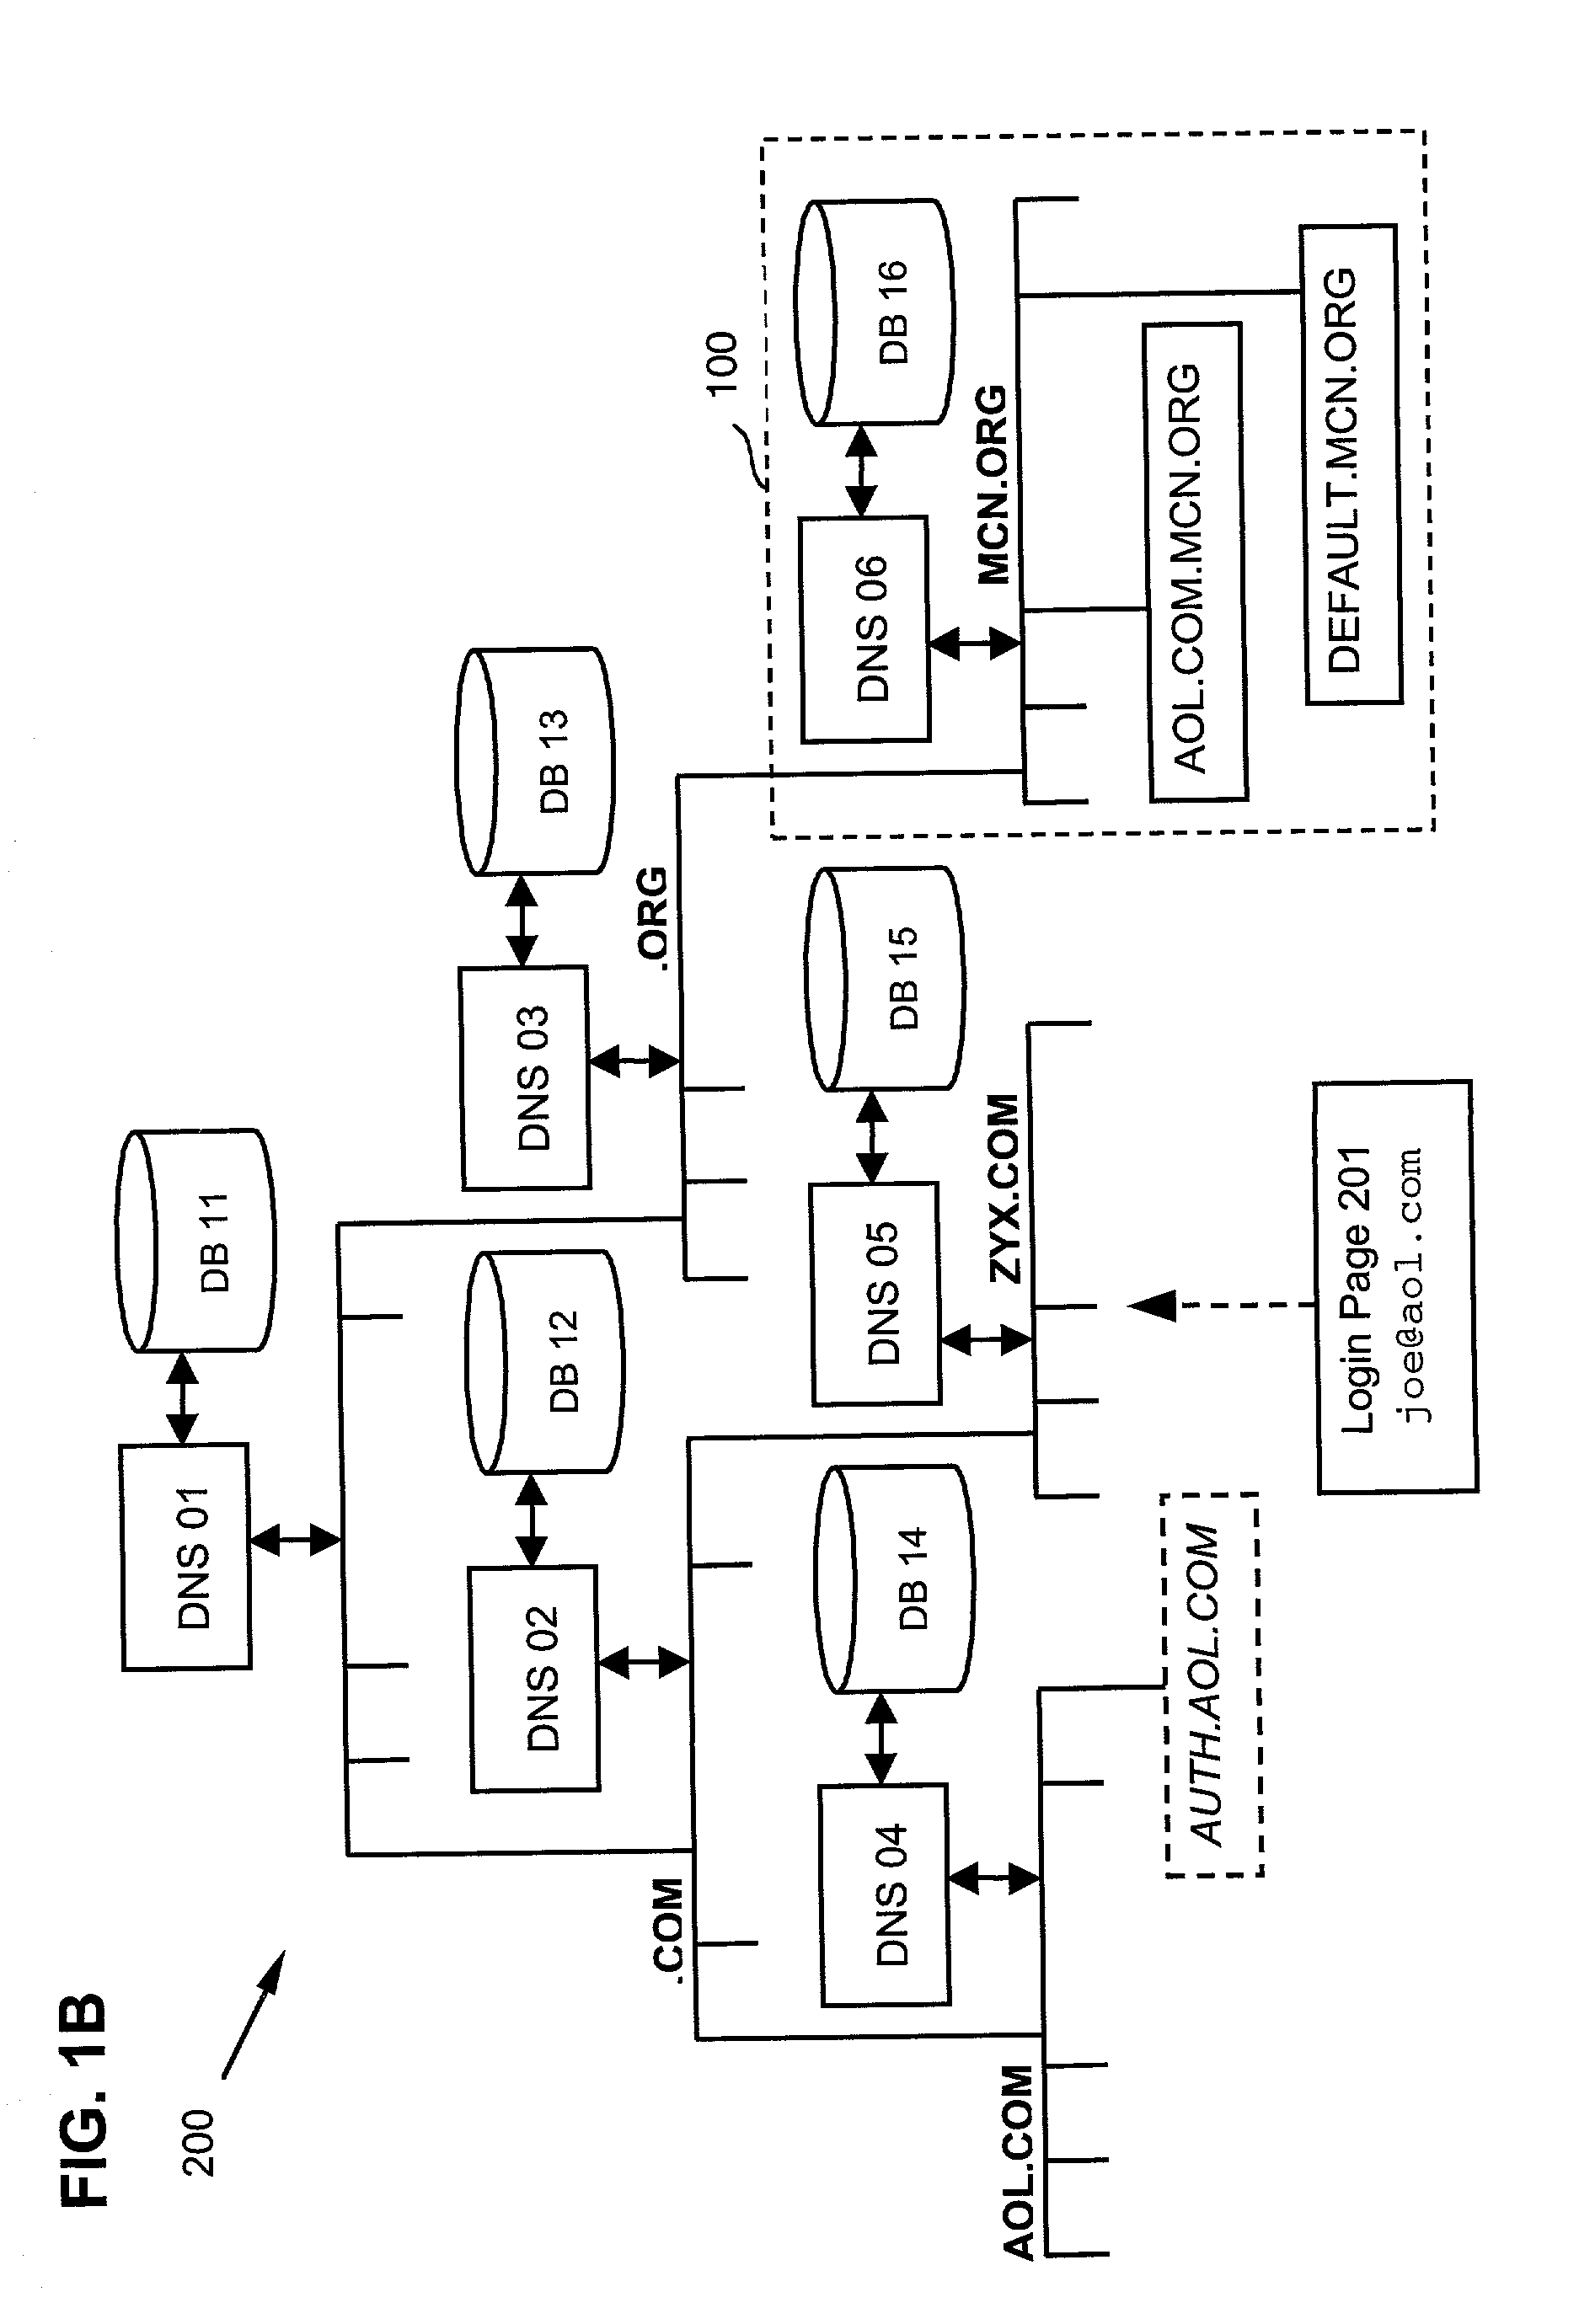 System and method for distributed authentication service